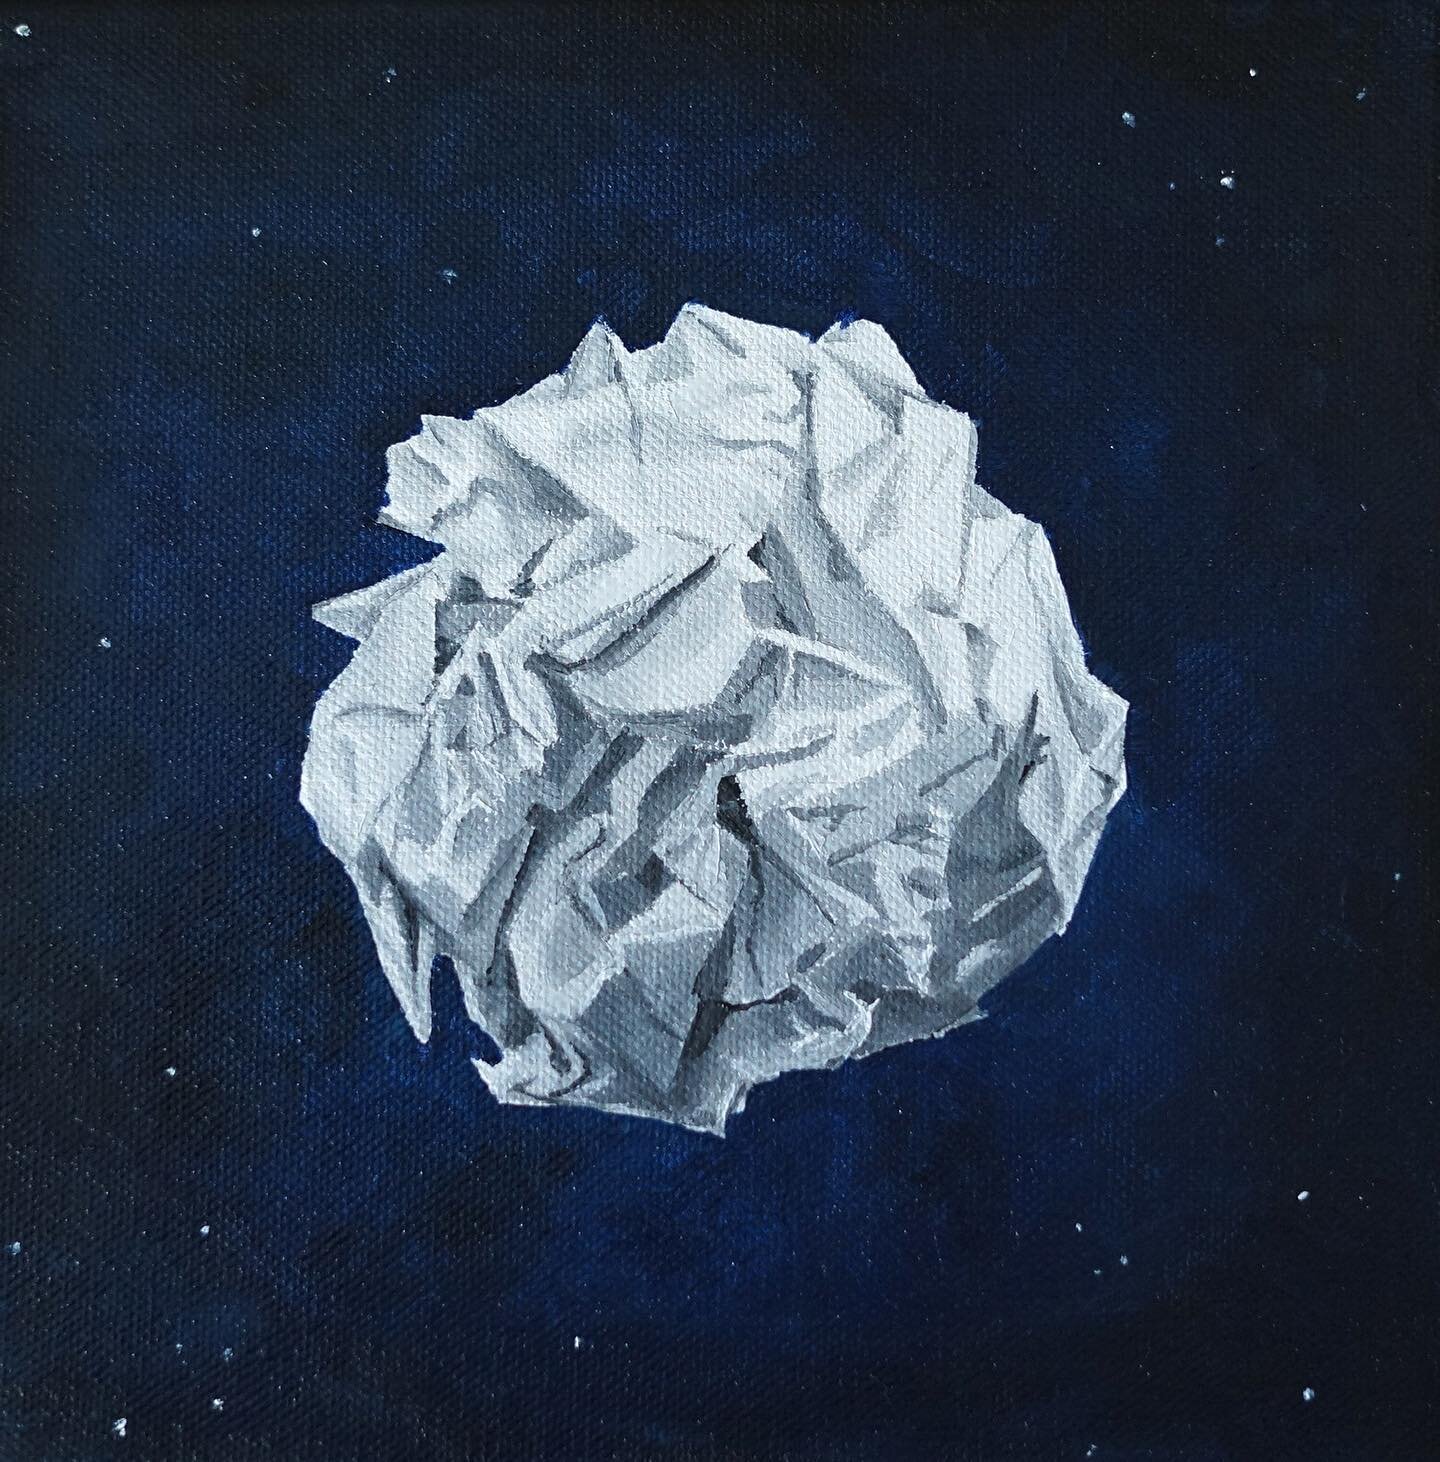 Crumpled Moon - a small 20 x 20 cm oil on canvas monochrome painting experiment.